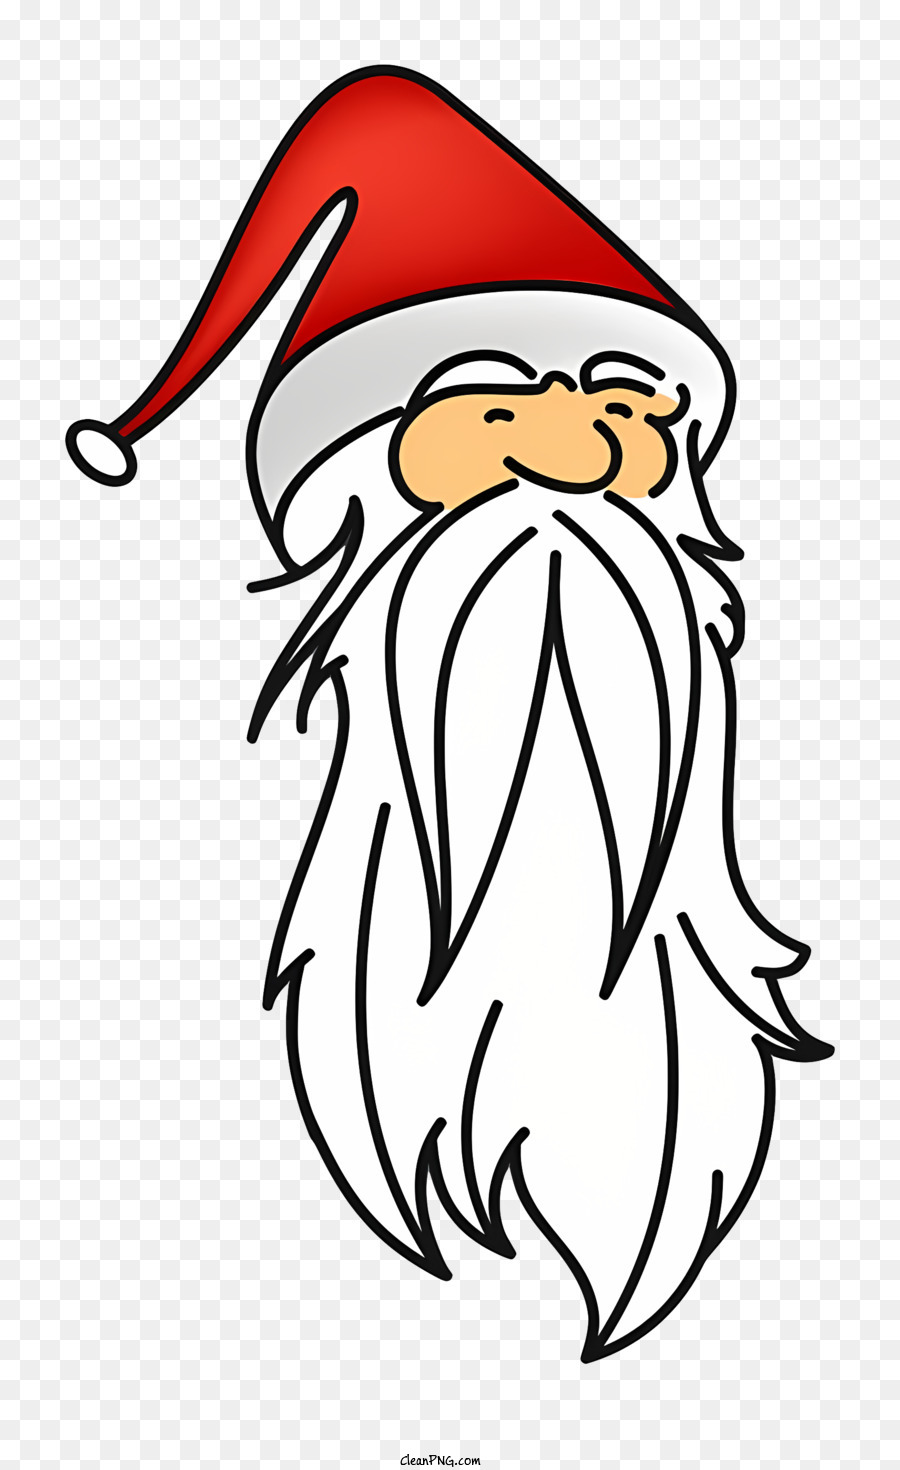 Santa Claus Hat Watercolormerry Christmas Clipart Stock Illustration  2314960199 | Shutterstock